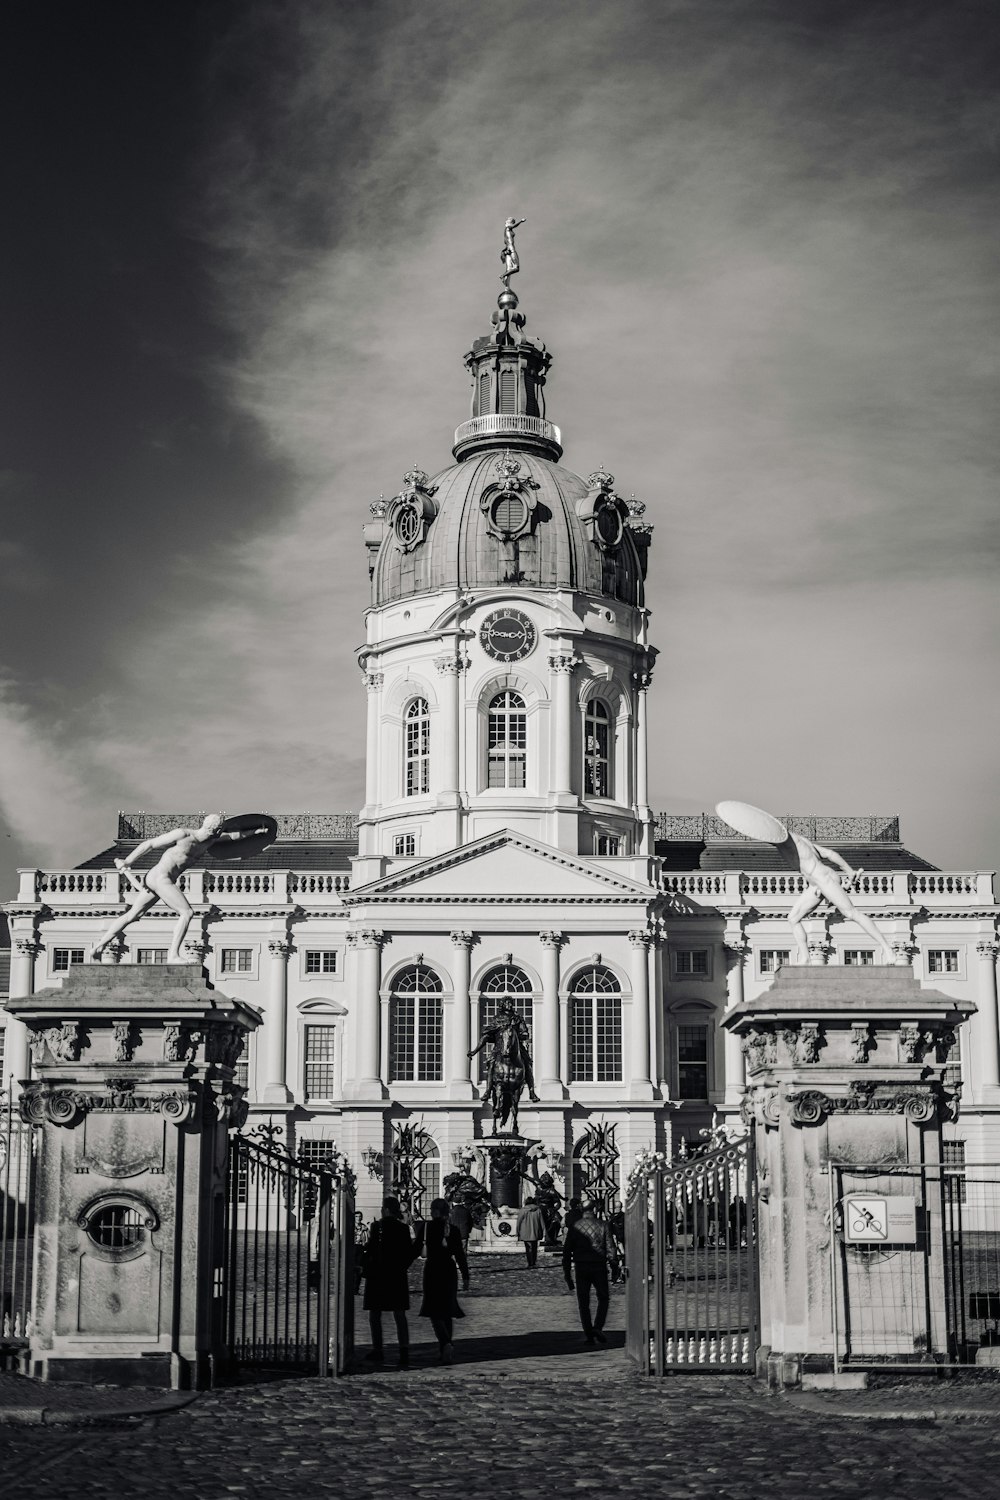 a black and white photo of a building with a clock tower